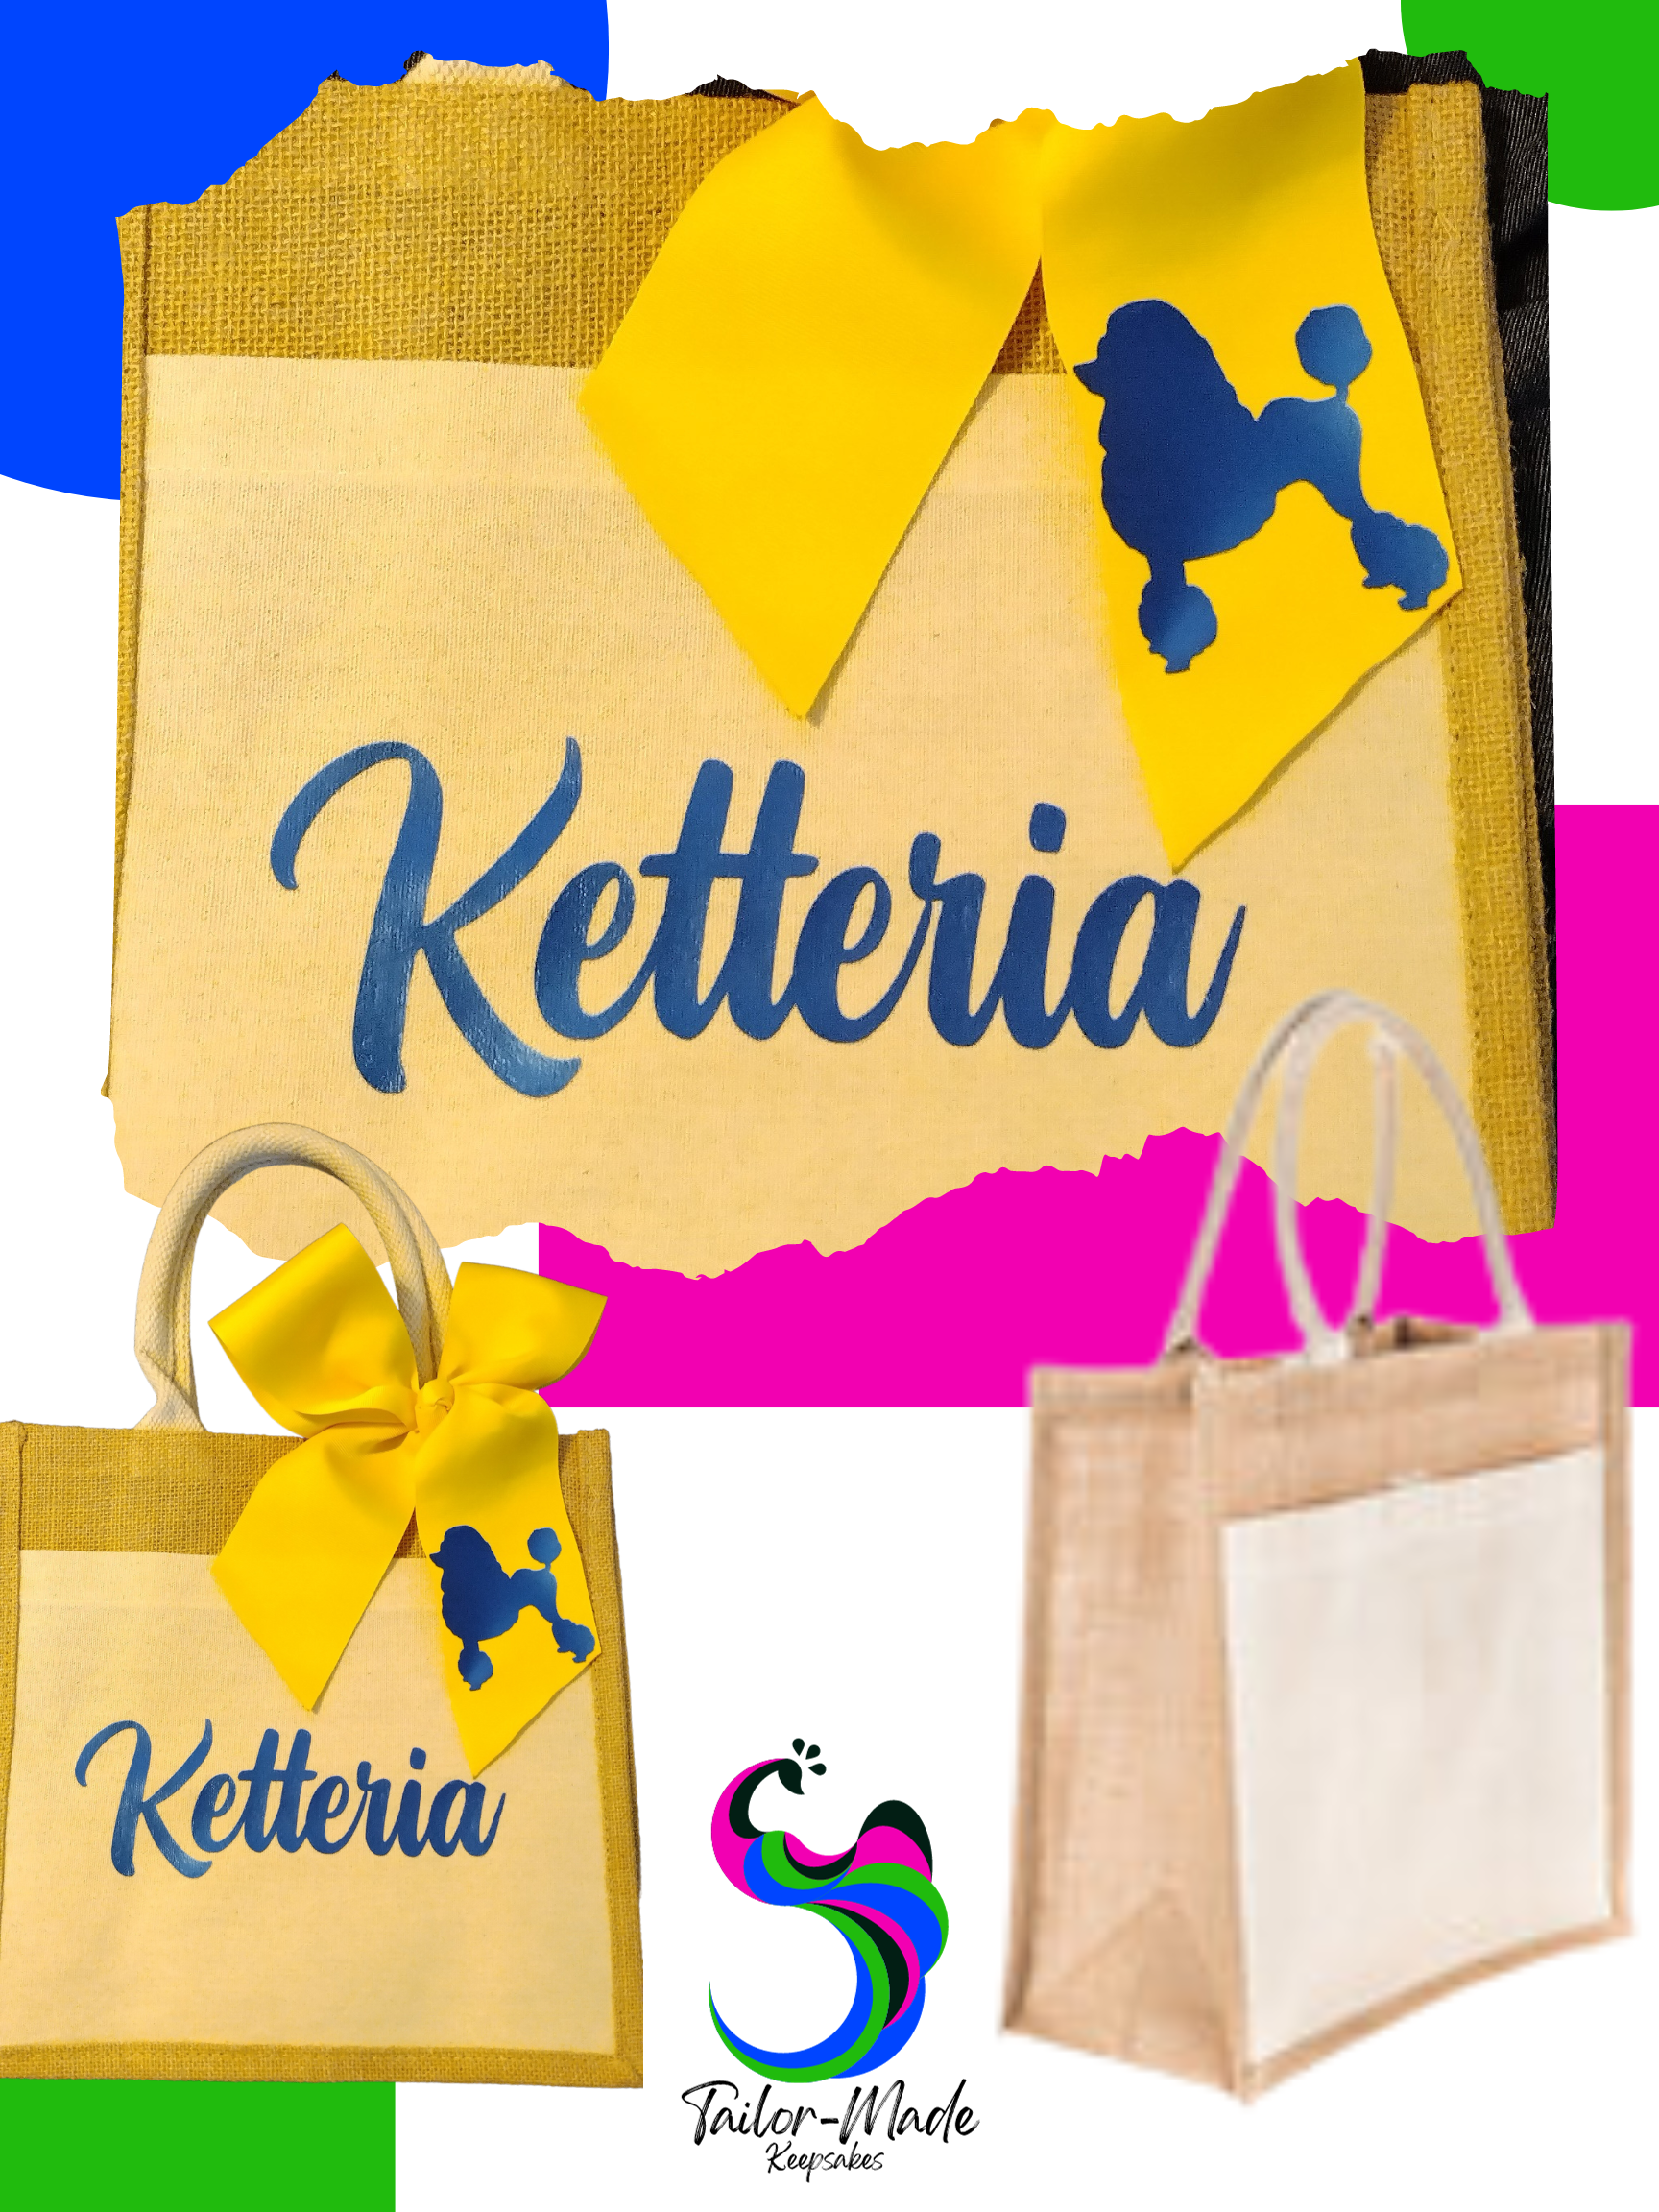 Small Custom Jute Tote Bag with Canvas front Pocket| Tailor-Made Keepsakes